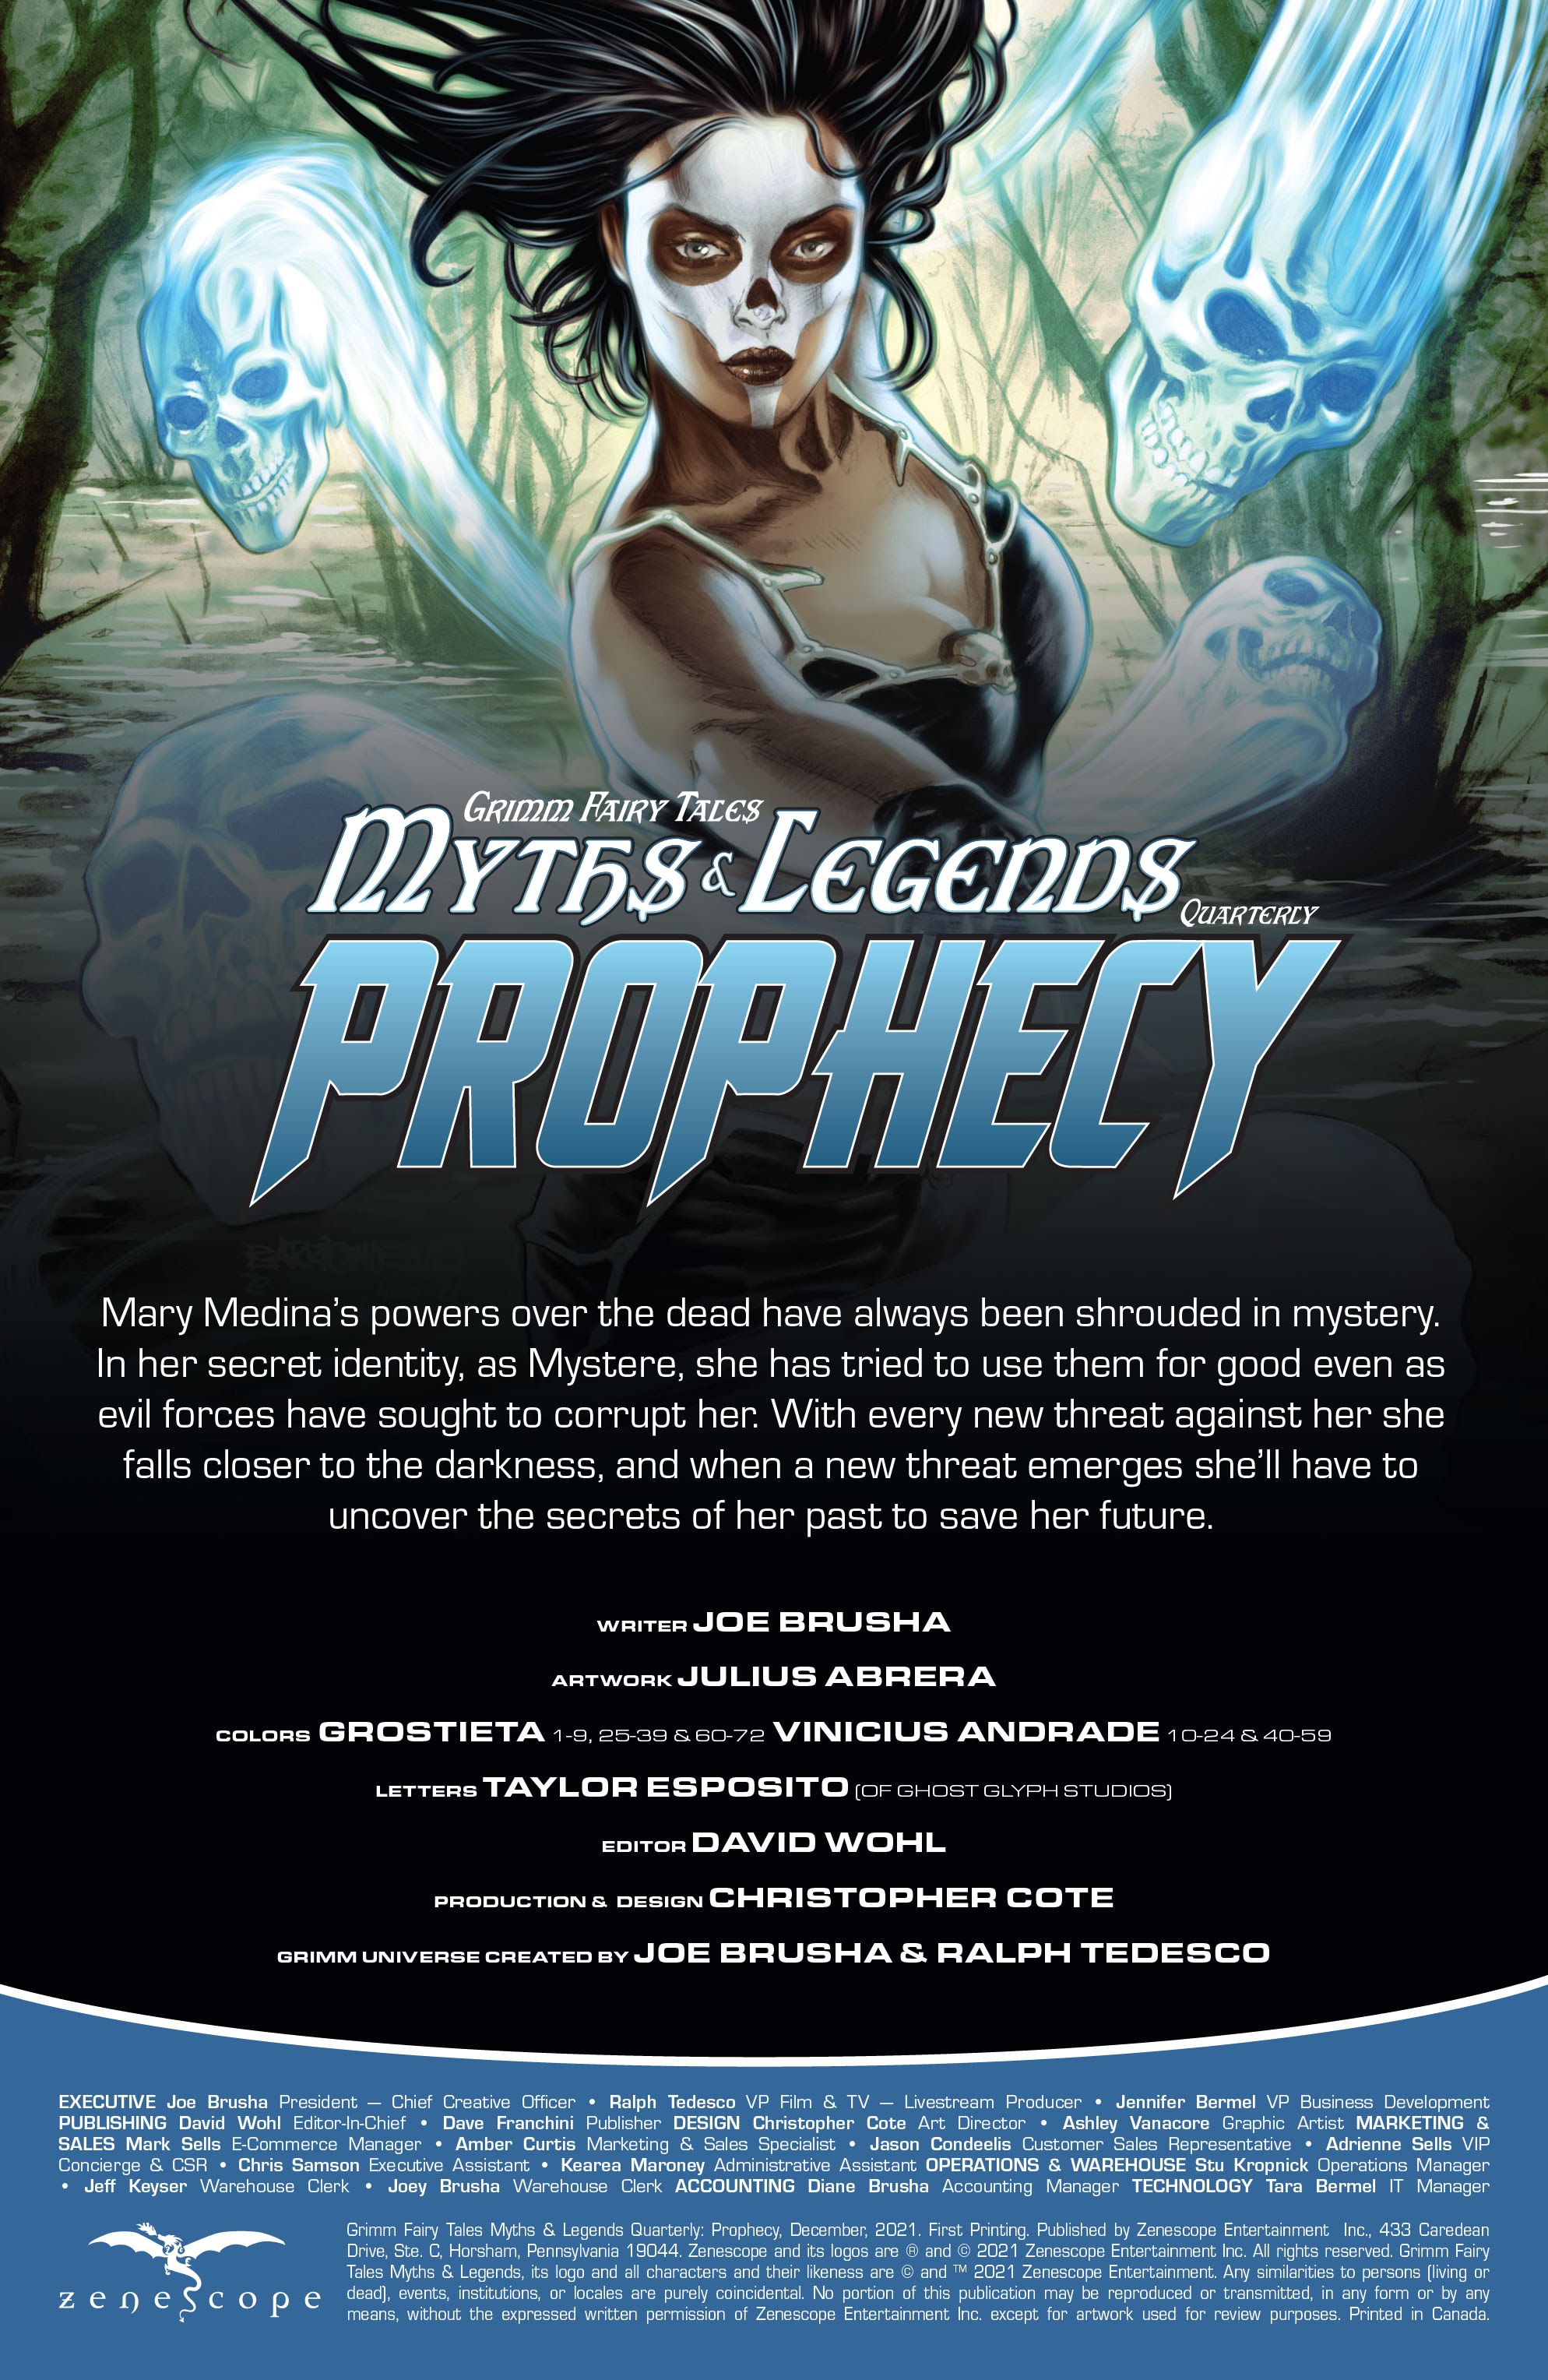 Read online Myths & Legends Quarterly: Prophecy comic -  Issue # Full - 2